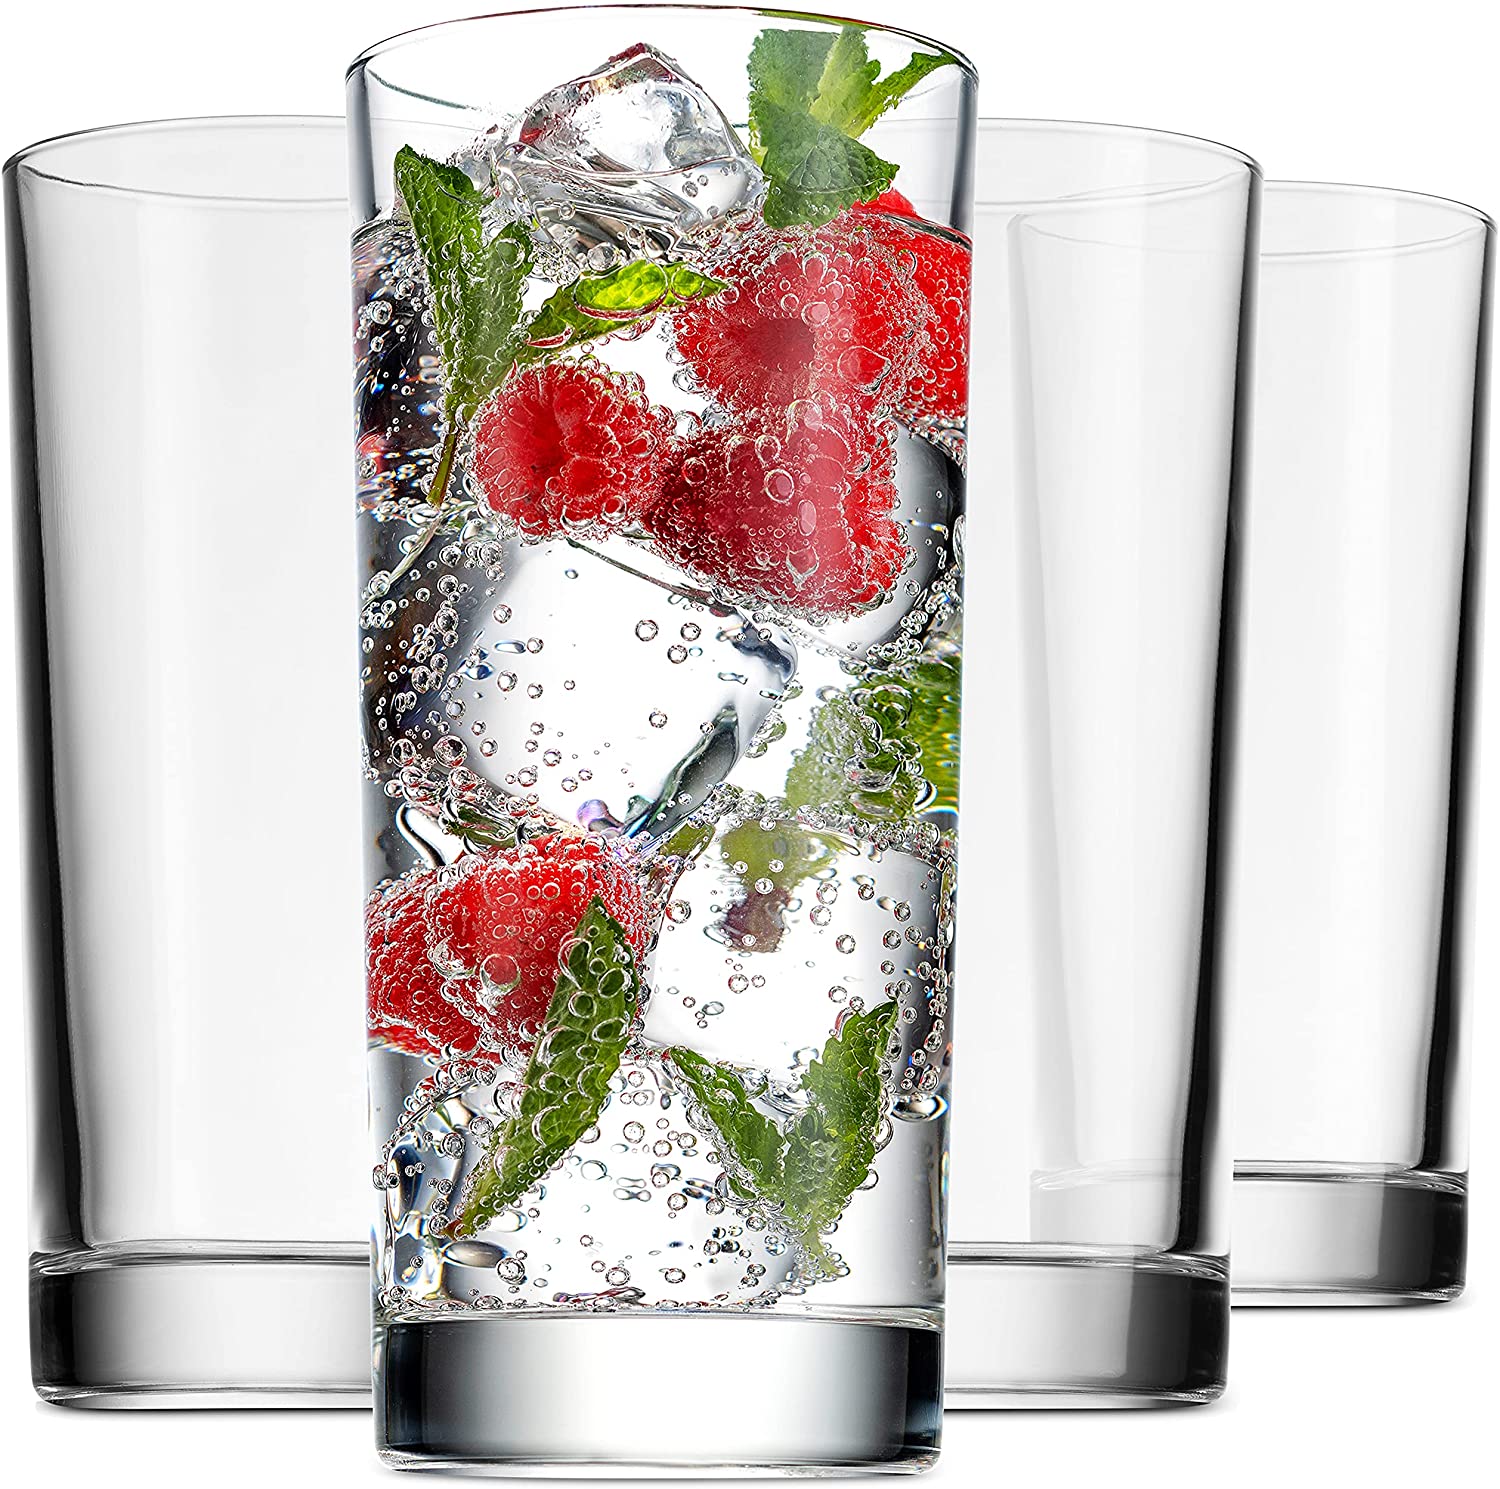 WMF Tumbler Glasses Set of 4 Tumblers with Honeycomb Structure Cocktail Long Drink Glass Heat Resistant Dishwasher Safe, Glass, Transparent, 16.